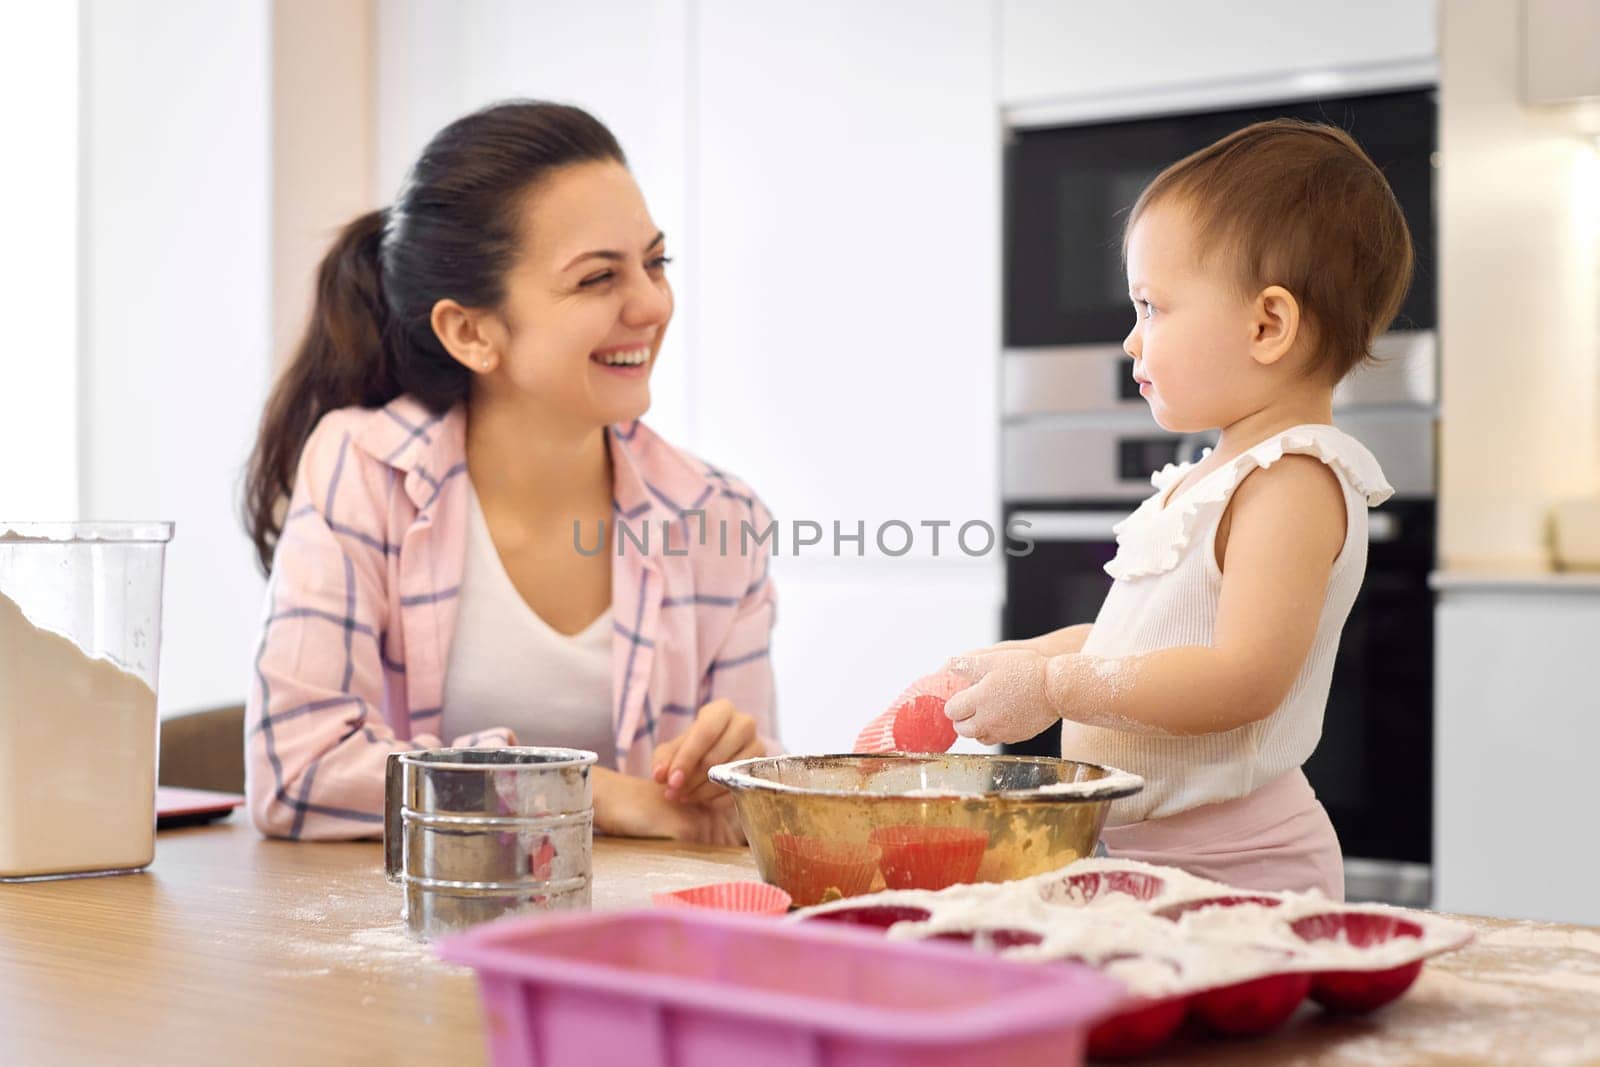 mother and little baby girl preparing the dough in the kitchen, bake cookies. happy time together